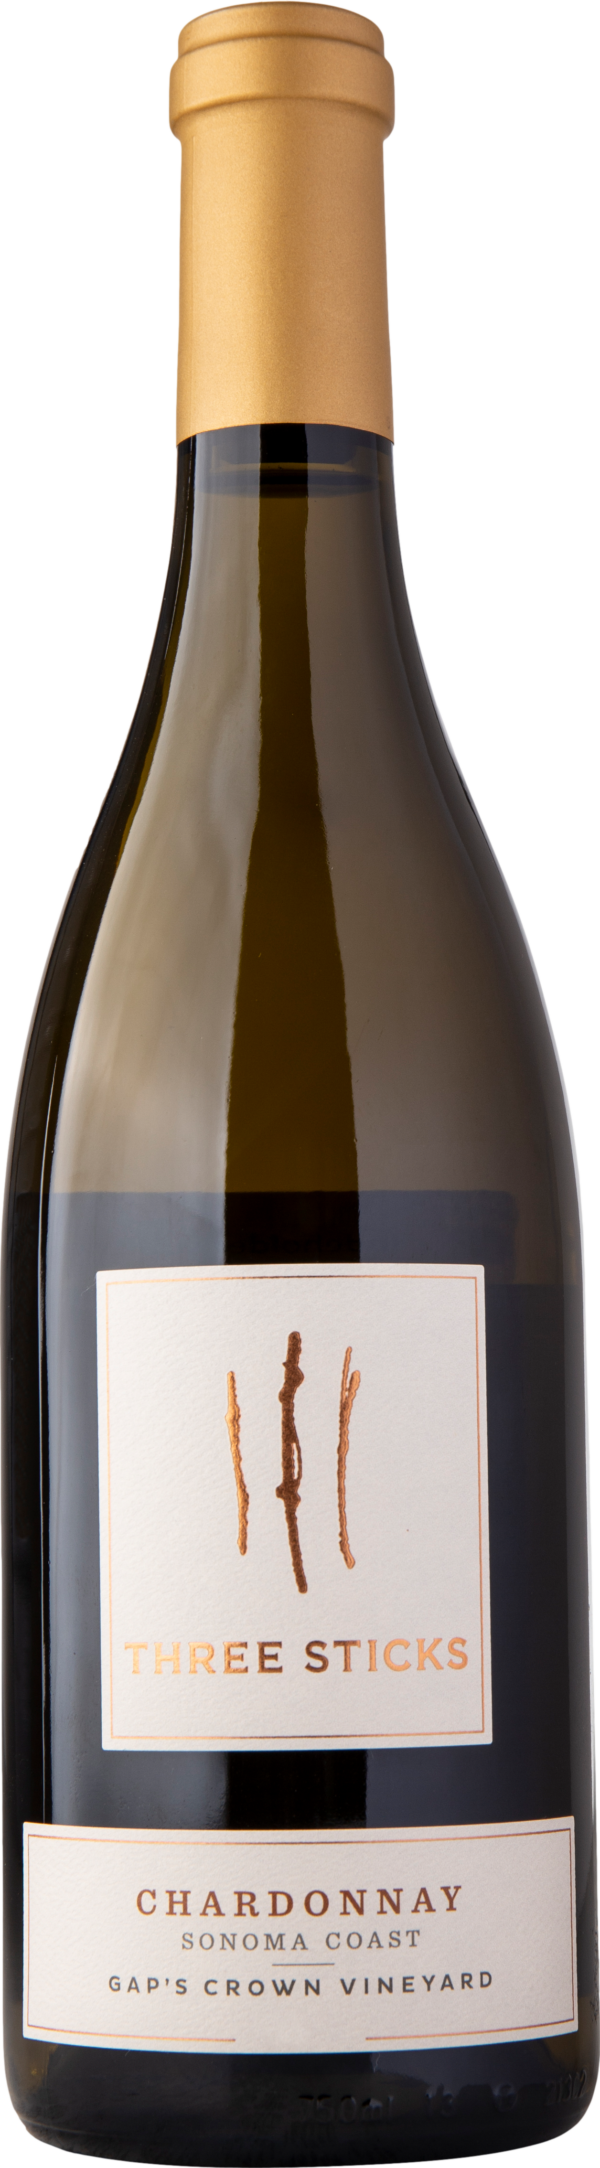 Product image of Three Sticks Gap's Crown Chardonnay 2019 from 8wines